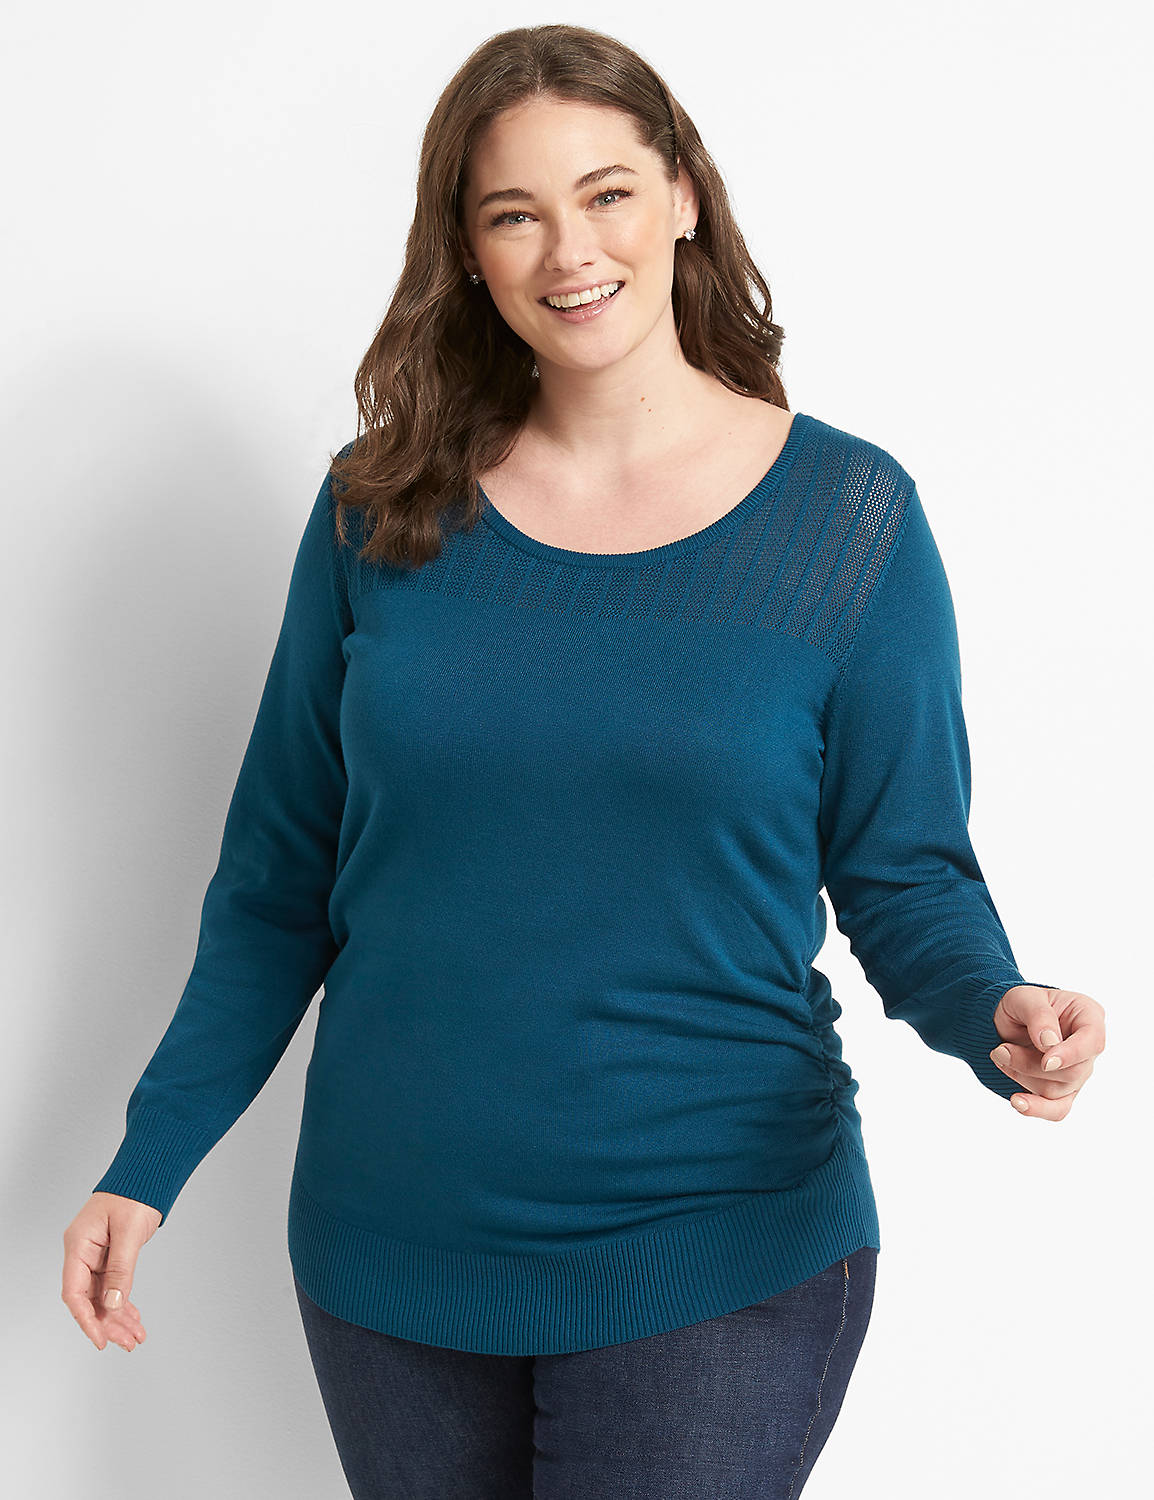 Ruched-Side Sweater - Pointelle Product Image 1